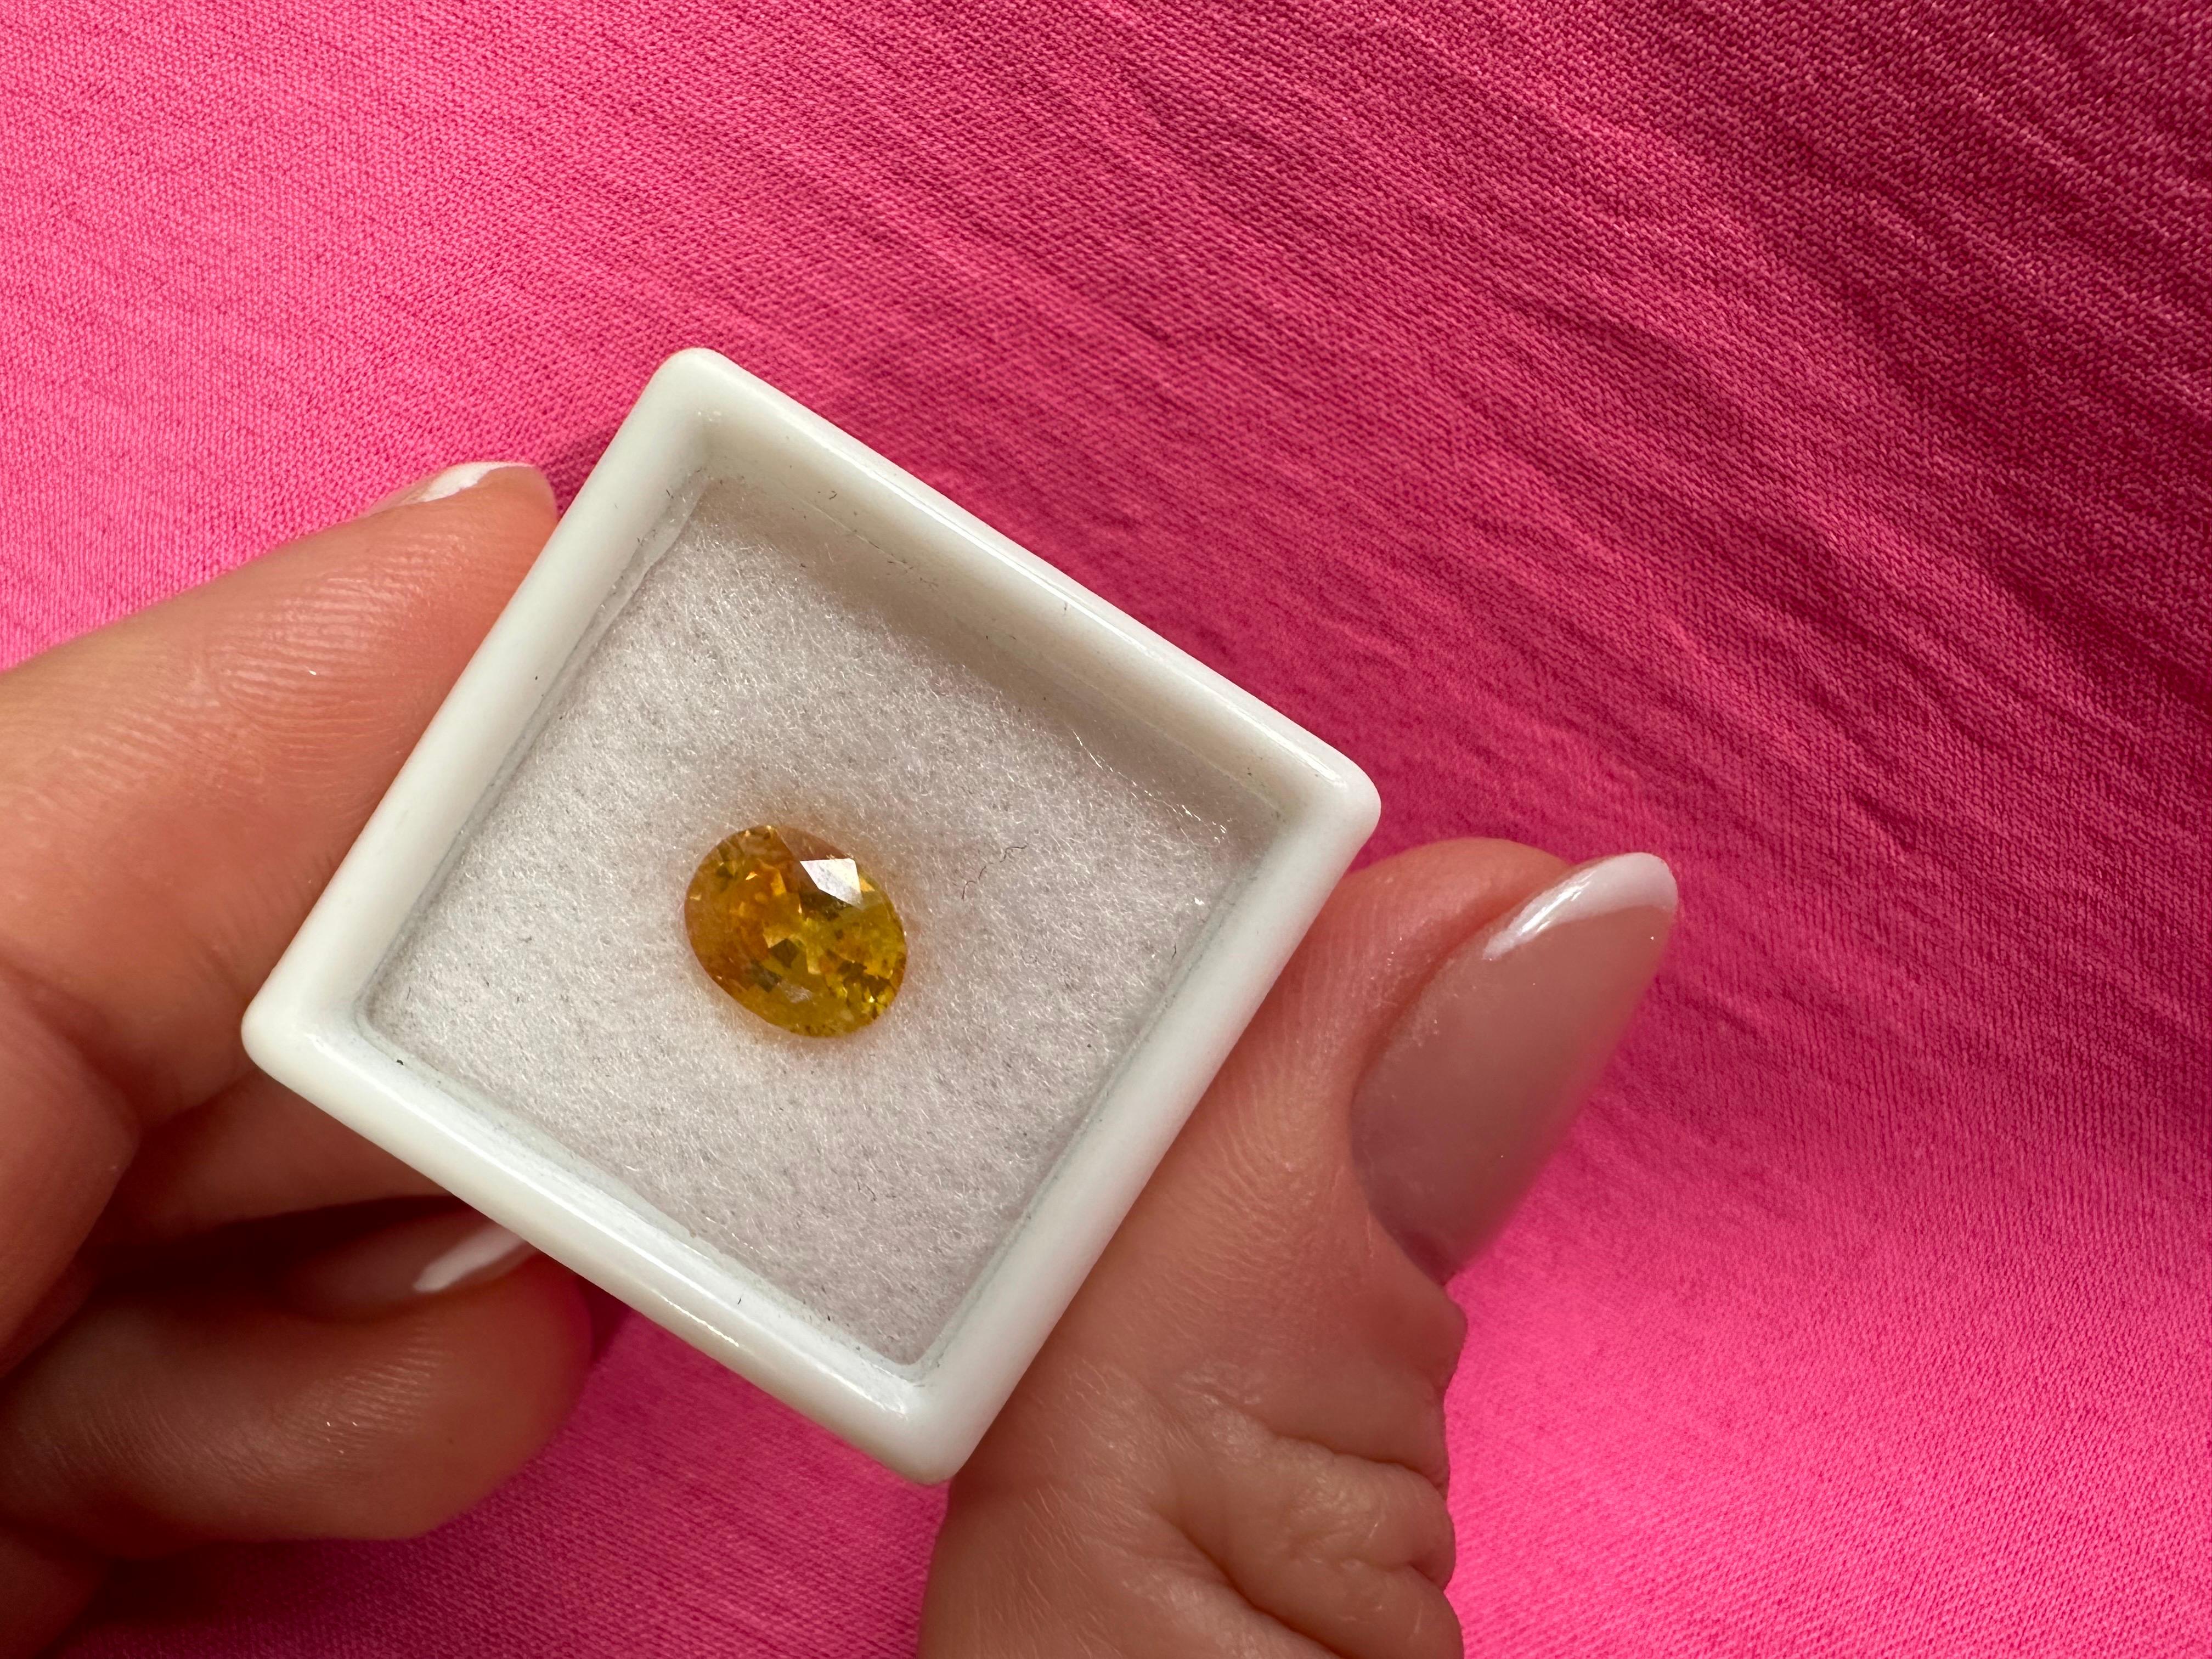 Stunning yellow sapphire with great sparkle! Just over 2ct makes a great gift for anyone, will come with a box and certificate.

NATURAL GEMSTONE(S): SAPPHIRE
Clarity/Color: Slightly Included/Yellow
Cut: Rectangular 8.2mm x 6.4mm
Carat: